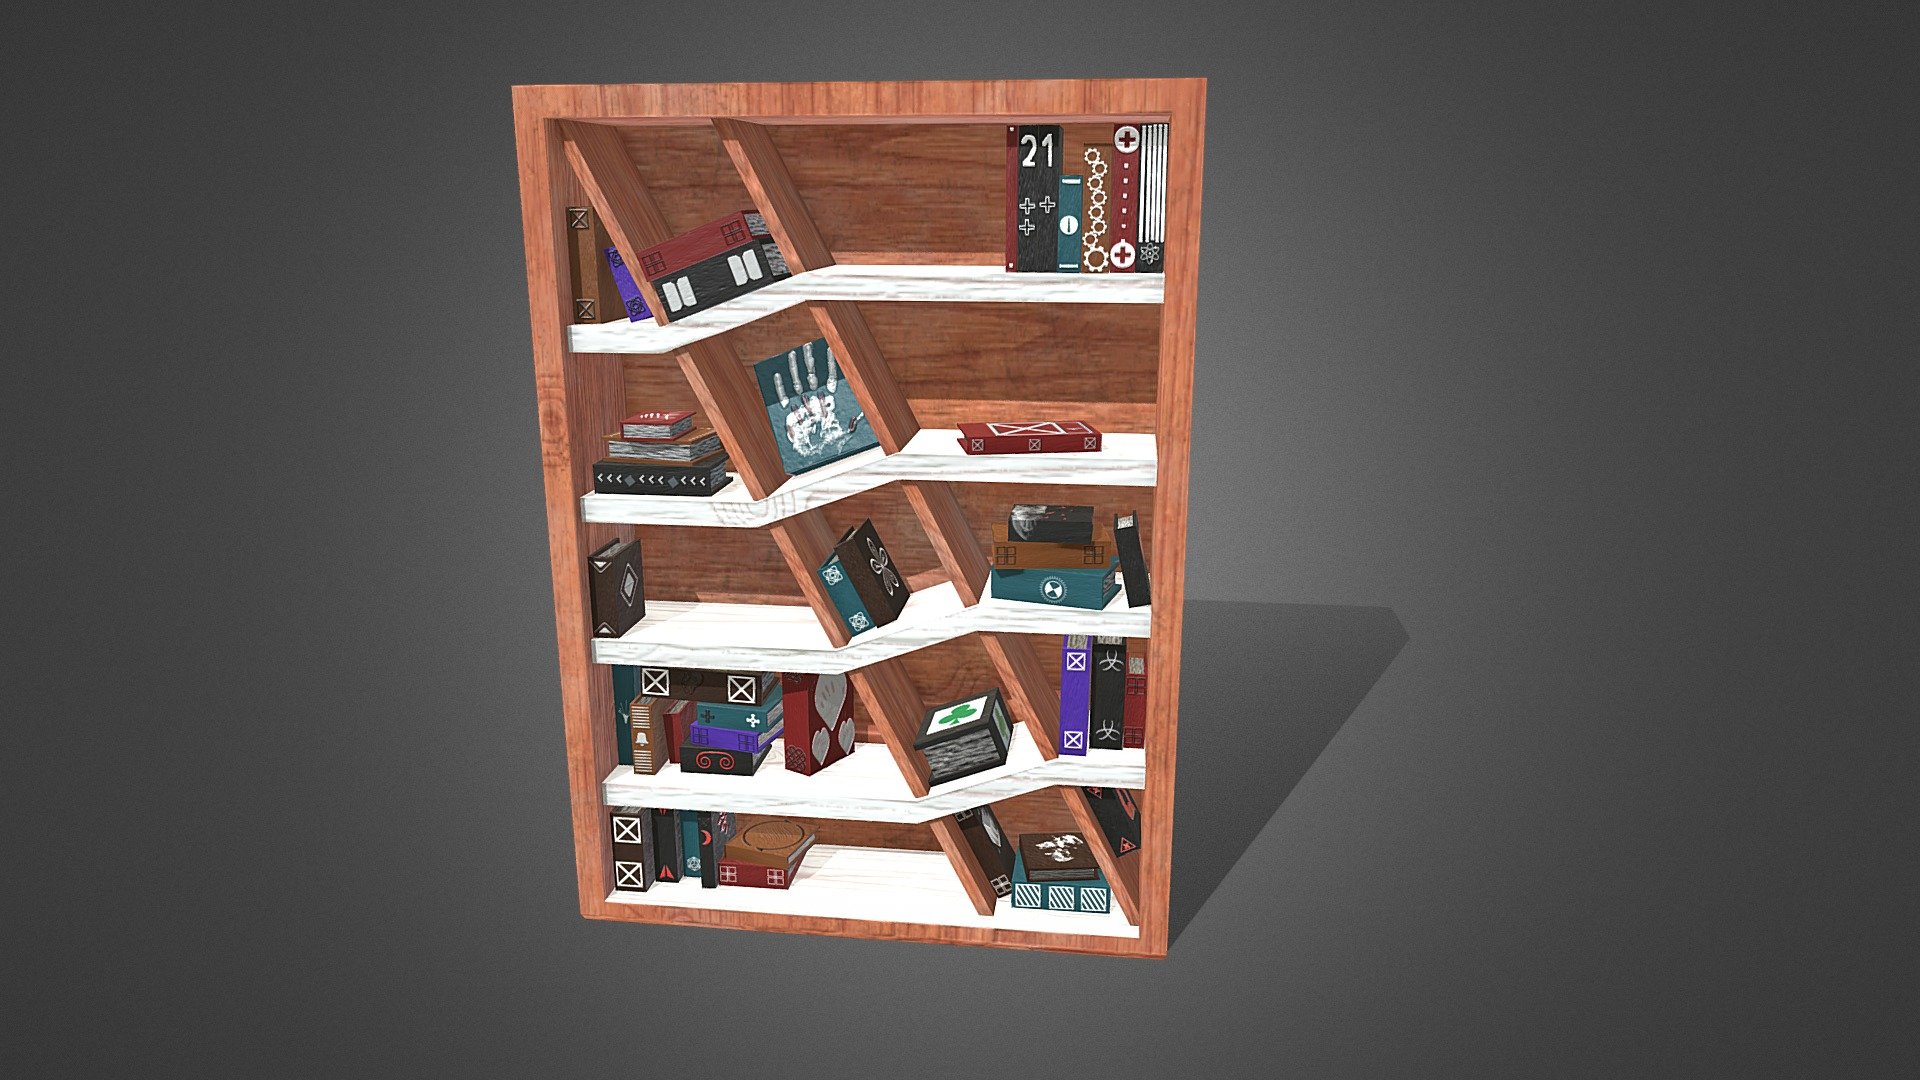 This is LP Bookshelf fill with a lot of LP books. Waiting for your downlaod.

This asset pack contains:

Bookshelf with interesting inside design.

44 LP book with interesting texture.

Technical information:

Texture of books 4096x4096.

Texture of bookshelf 2048x2048.

44 books - 1980 tris, 1980 faces, 1080 verts.

Bookshelf - 556 tris, 556 faces, 308 verts.

Thank you for taking look and leaving like. :) 3d model